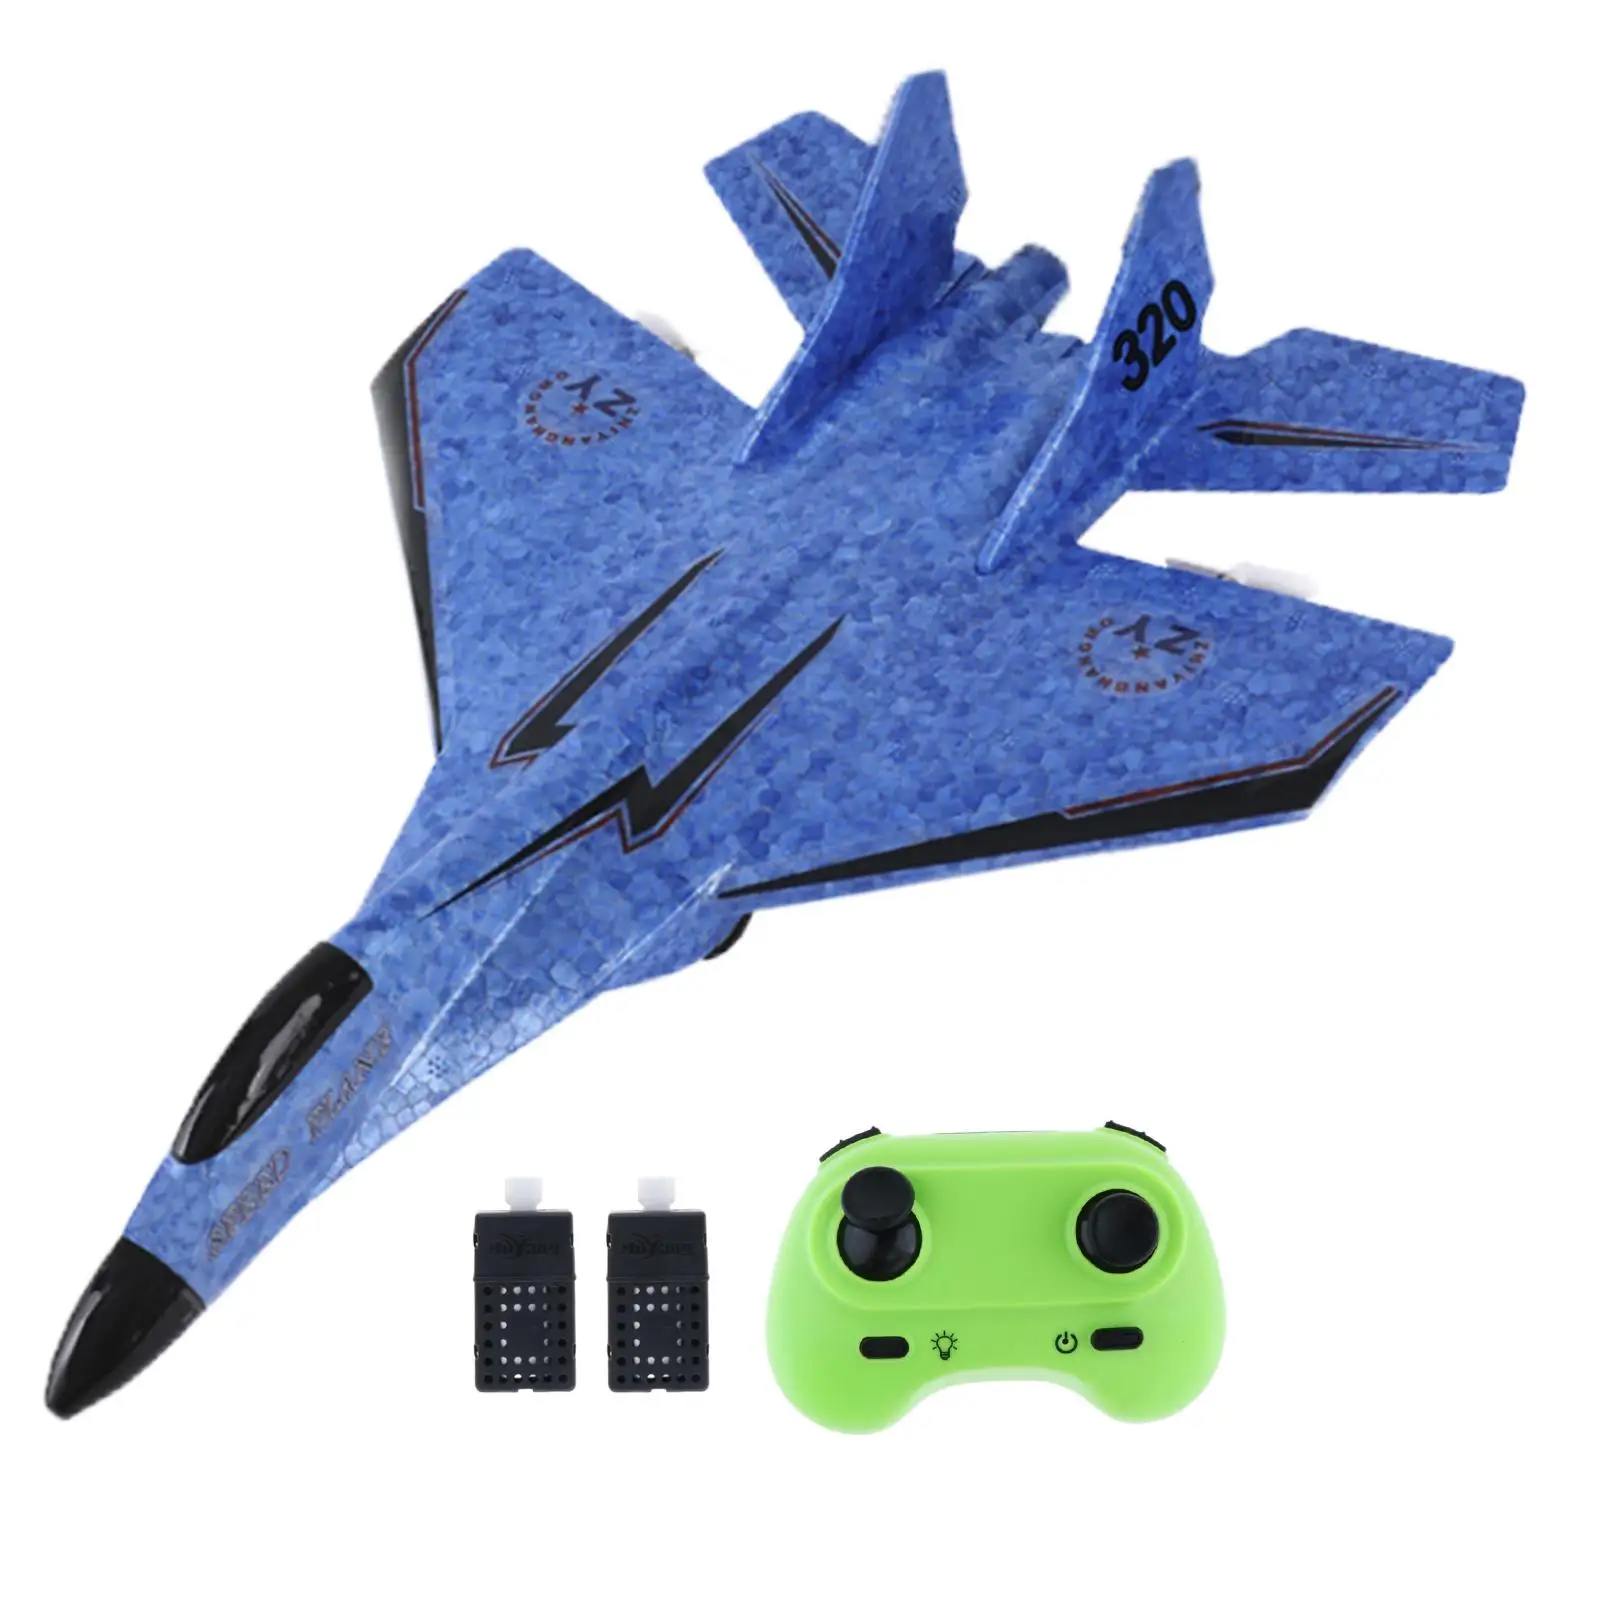 Foam Easy to Fly Channels Jet Fighter Fixed Wing Aircraft RC Glider Plane Birthday Gift Outdoor Toy for Kids and Adults